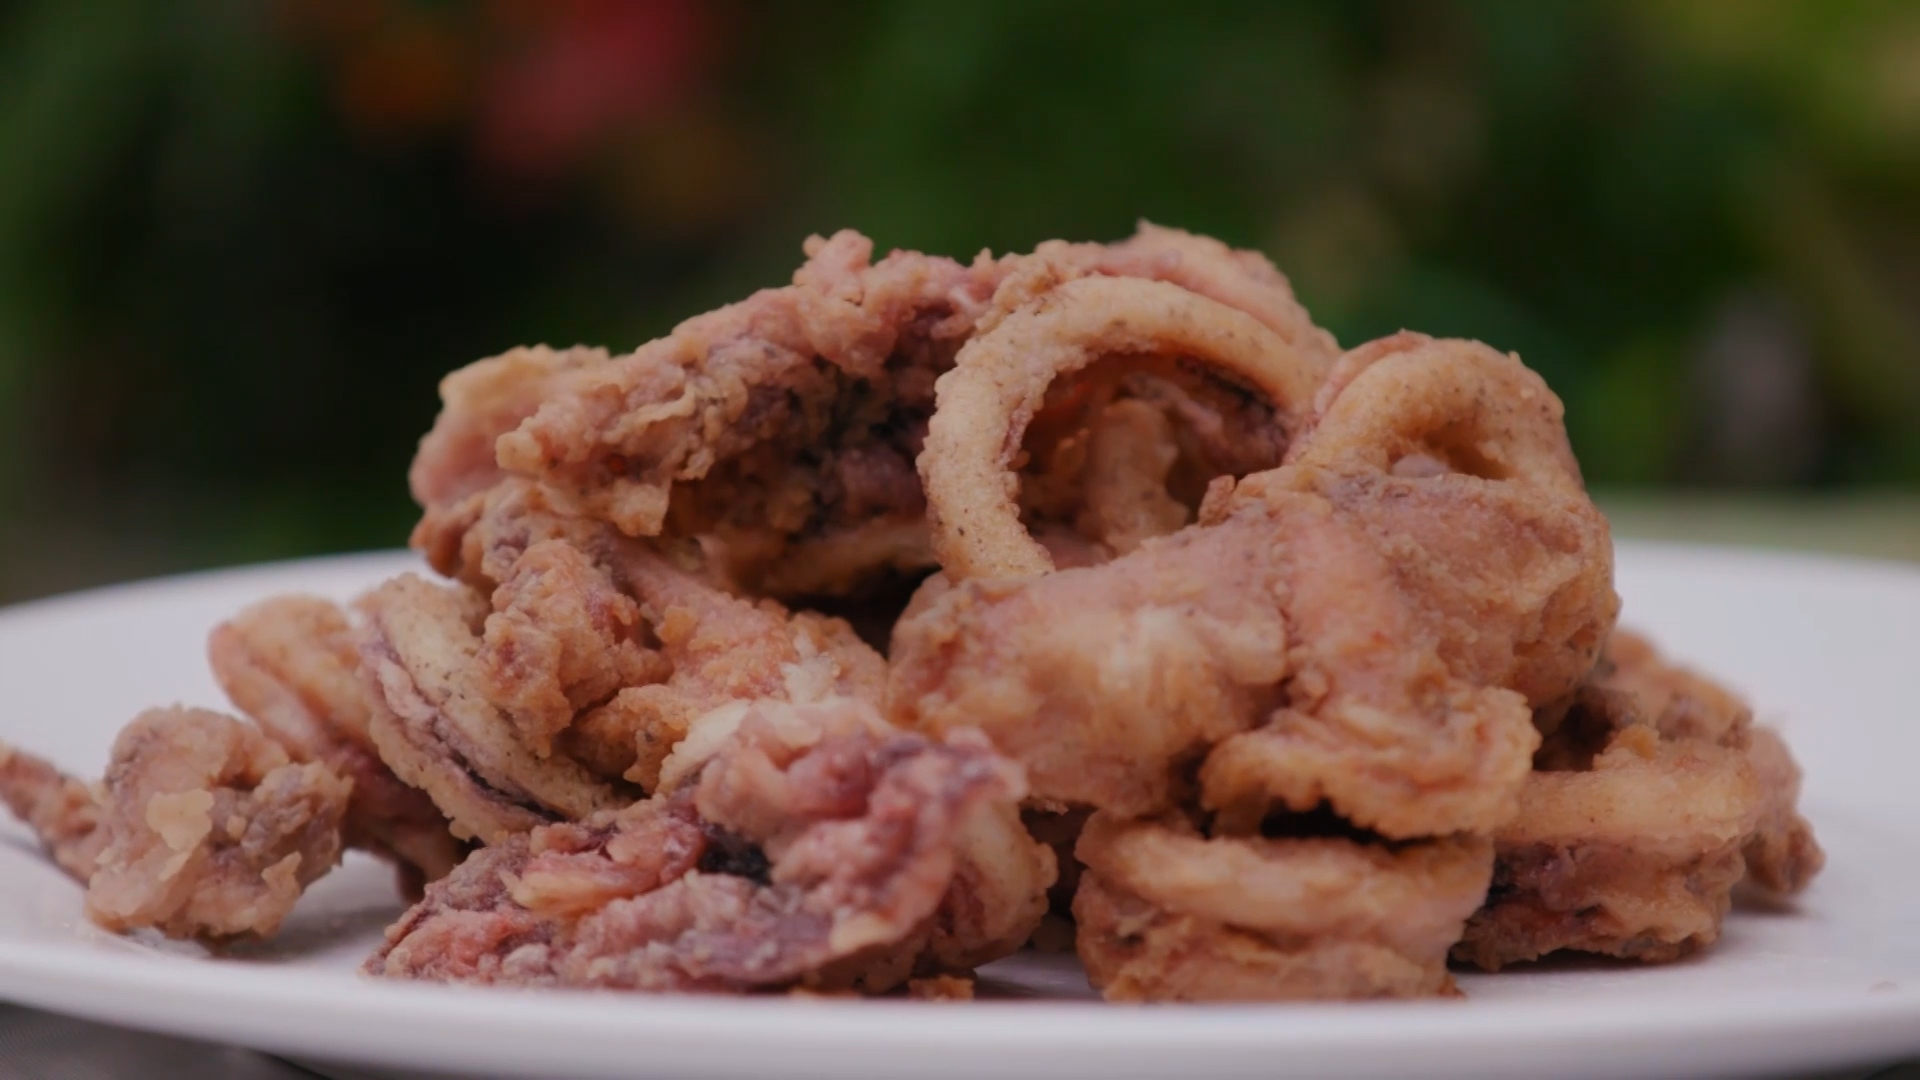 ‘Blockbuster’ Calamares In Sta. Ana, Manila Earning P20K A Day